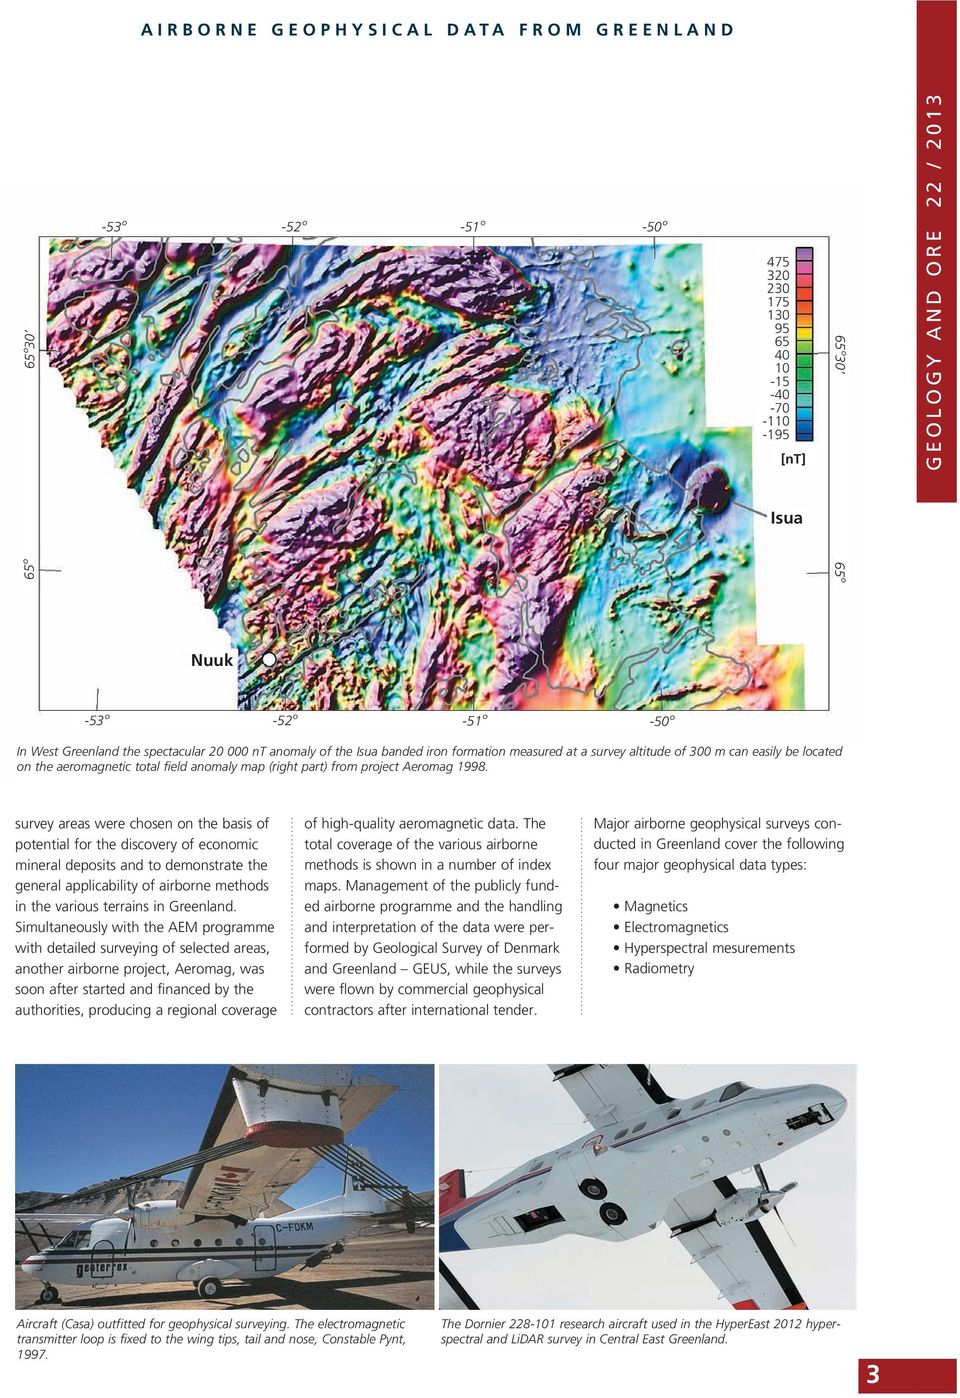 survey areas were chosen on the basis of potential for the discovery of economic mineral deposits and to demonstrate the general applicability of airborne methods in the various terrains in Greenland.